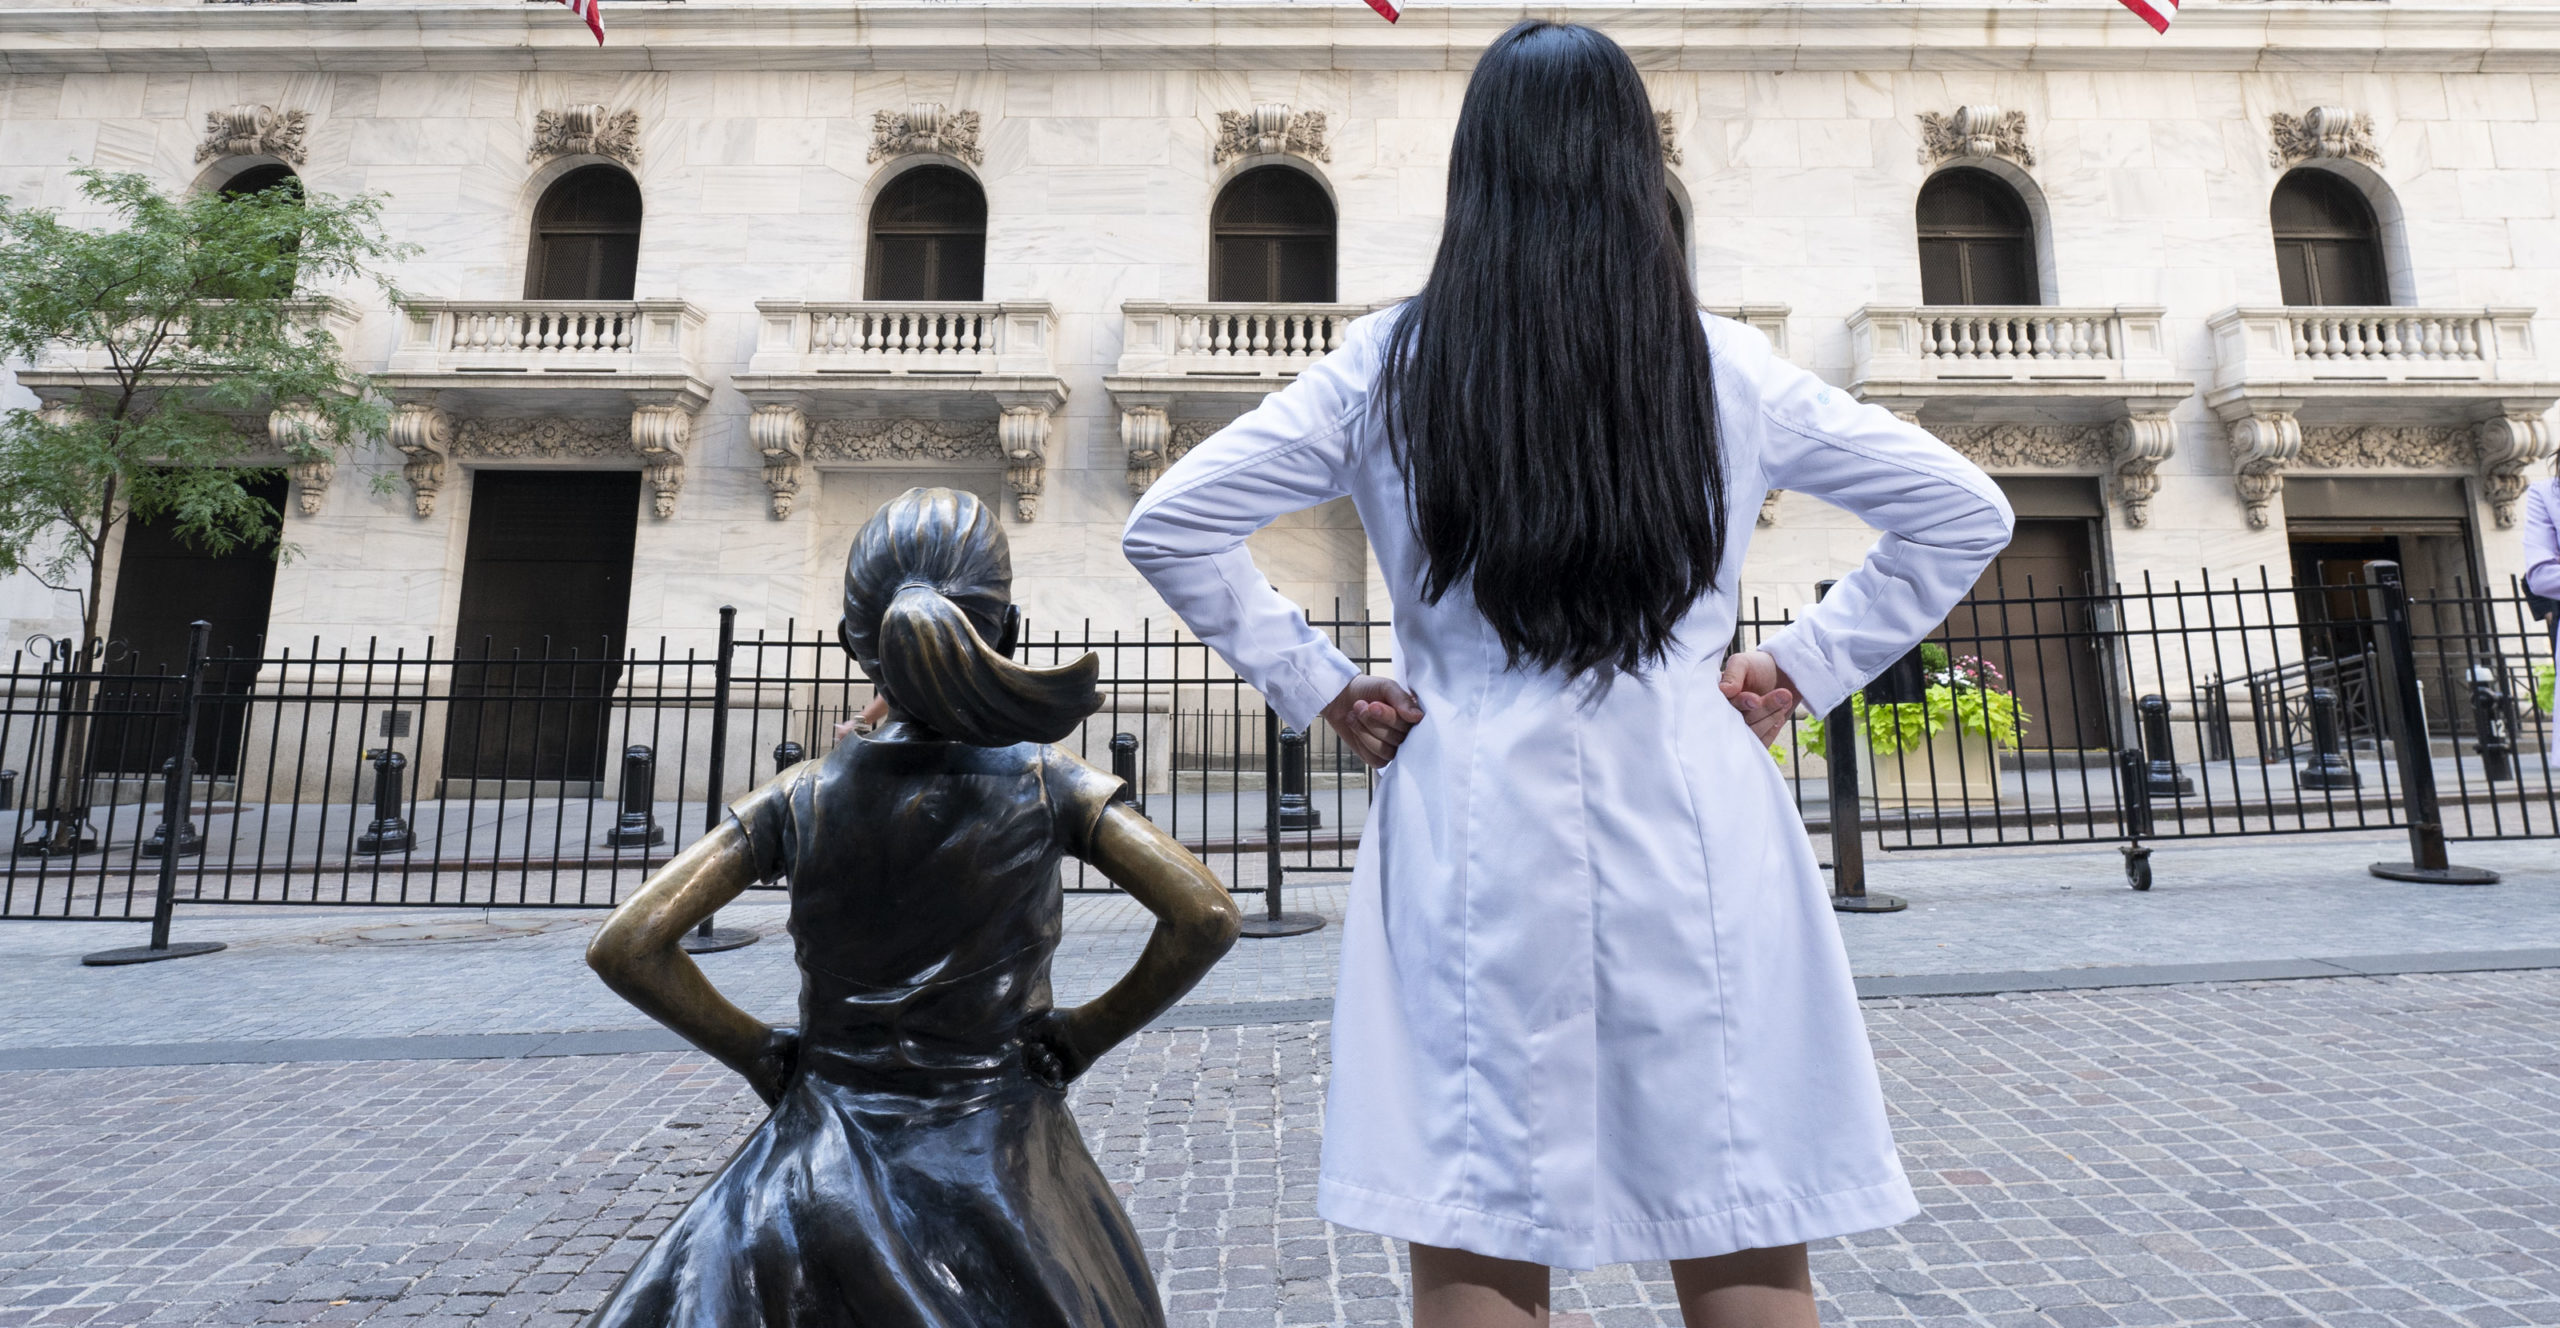 Dr. Wonnie Rhieu stands next to Fearless Girl statue facing the NY Stock Exchange. She mimics Fearless Girl's power stance.